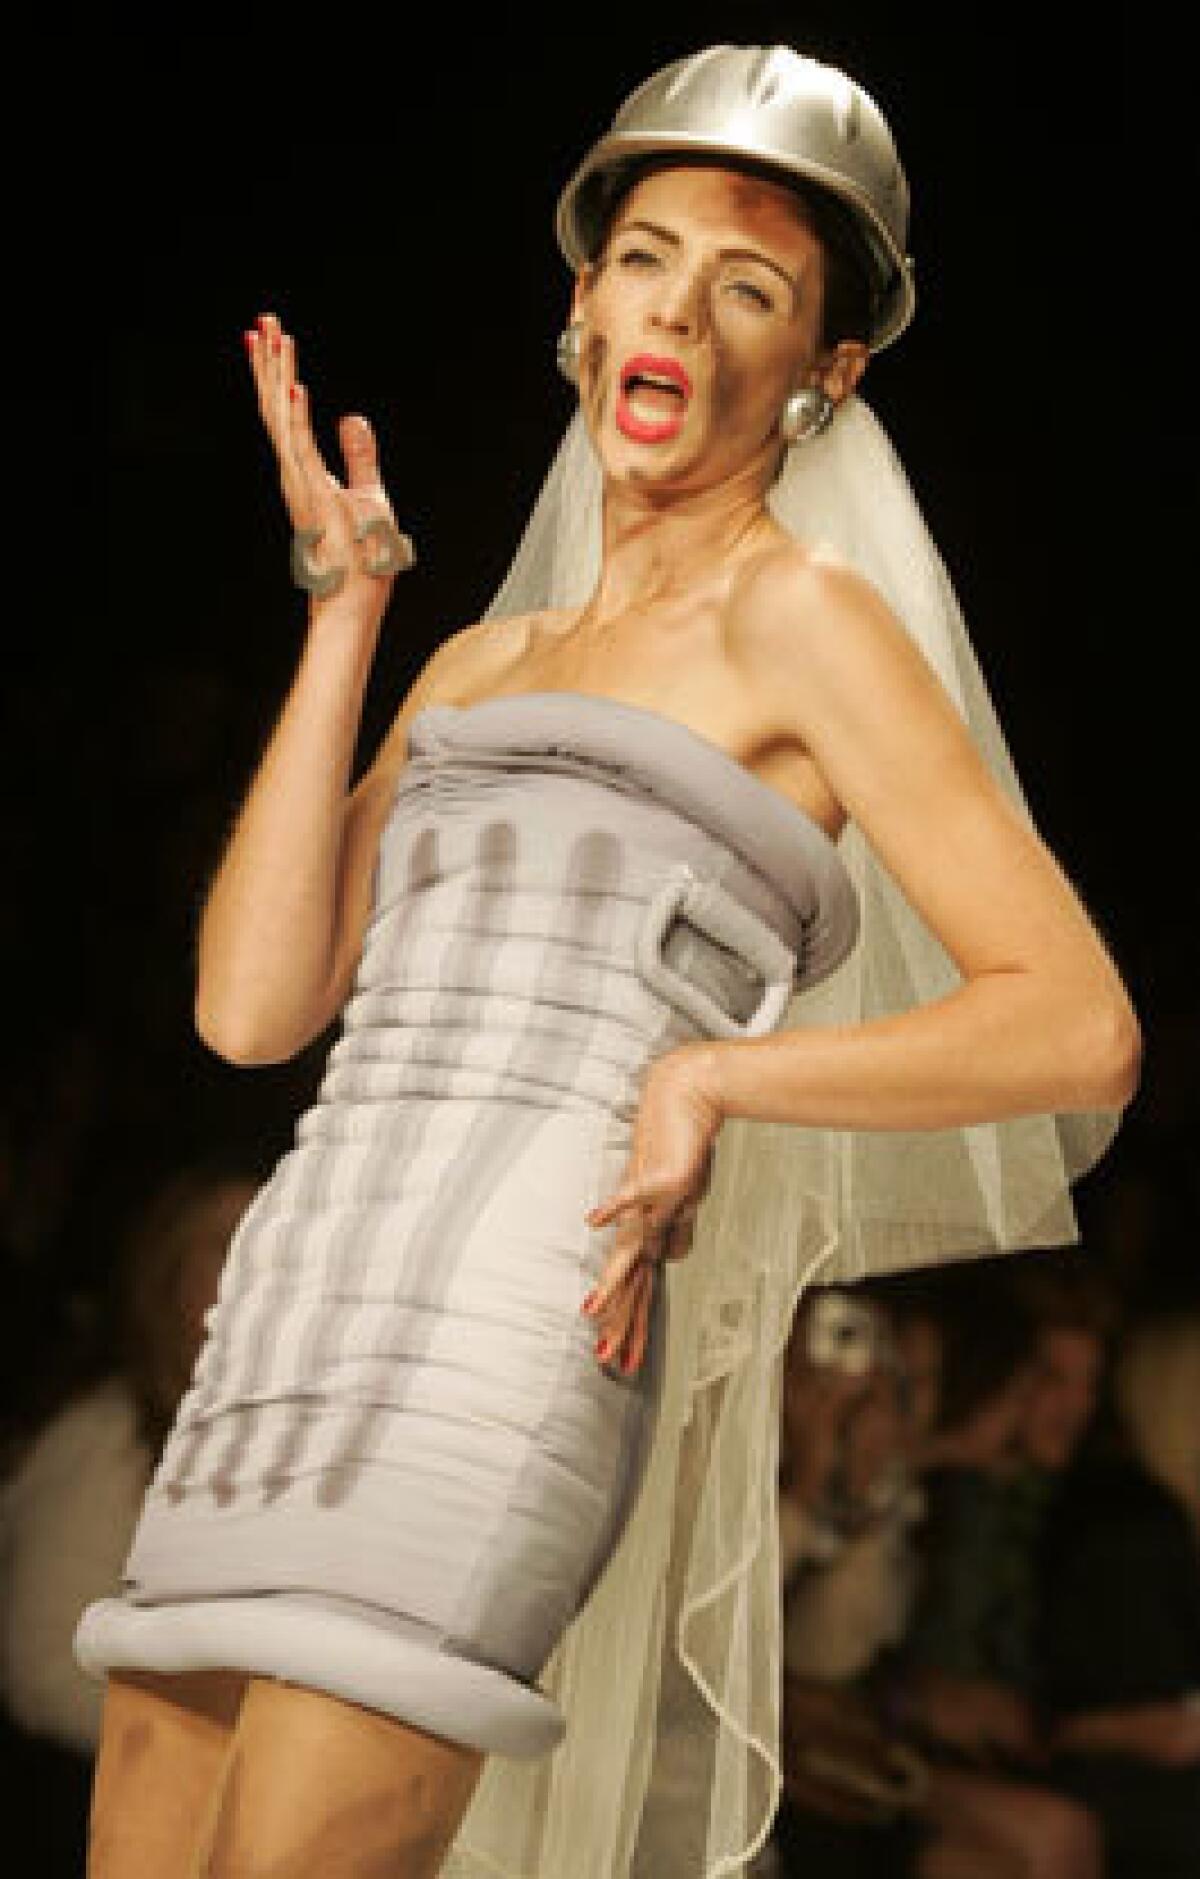 JEREMY SCOTT: A garbage can dress with accessories including screw-shaped earrings, hard hat and tulle veil redefine trashy bride.